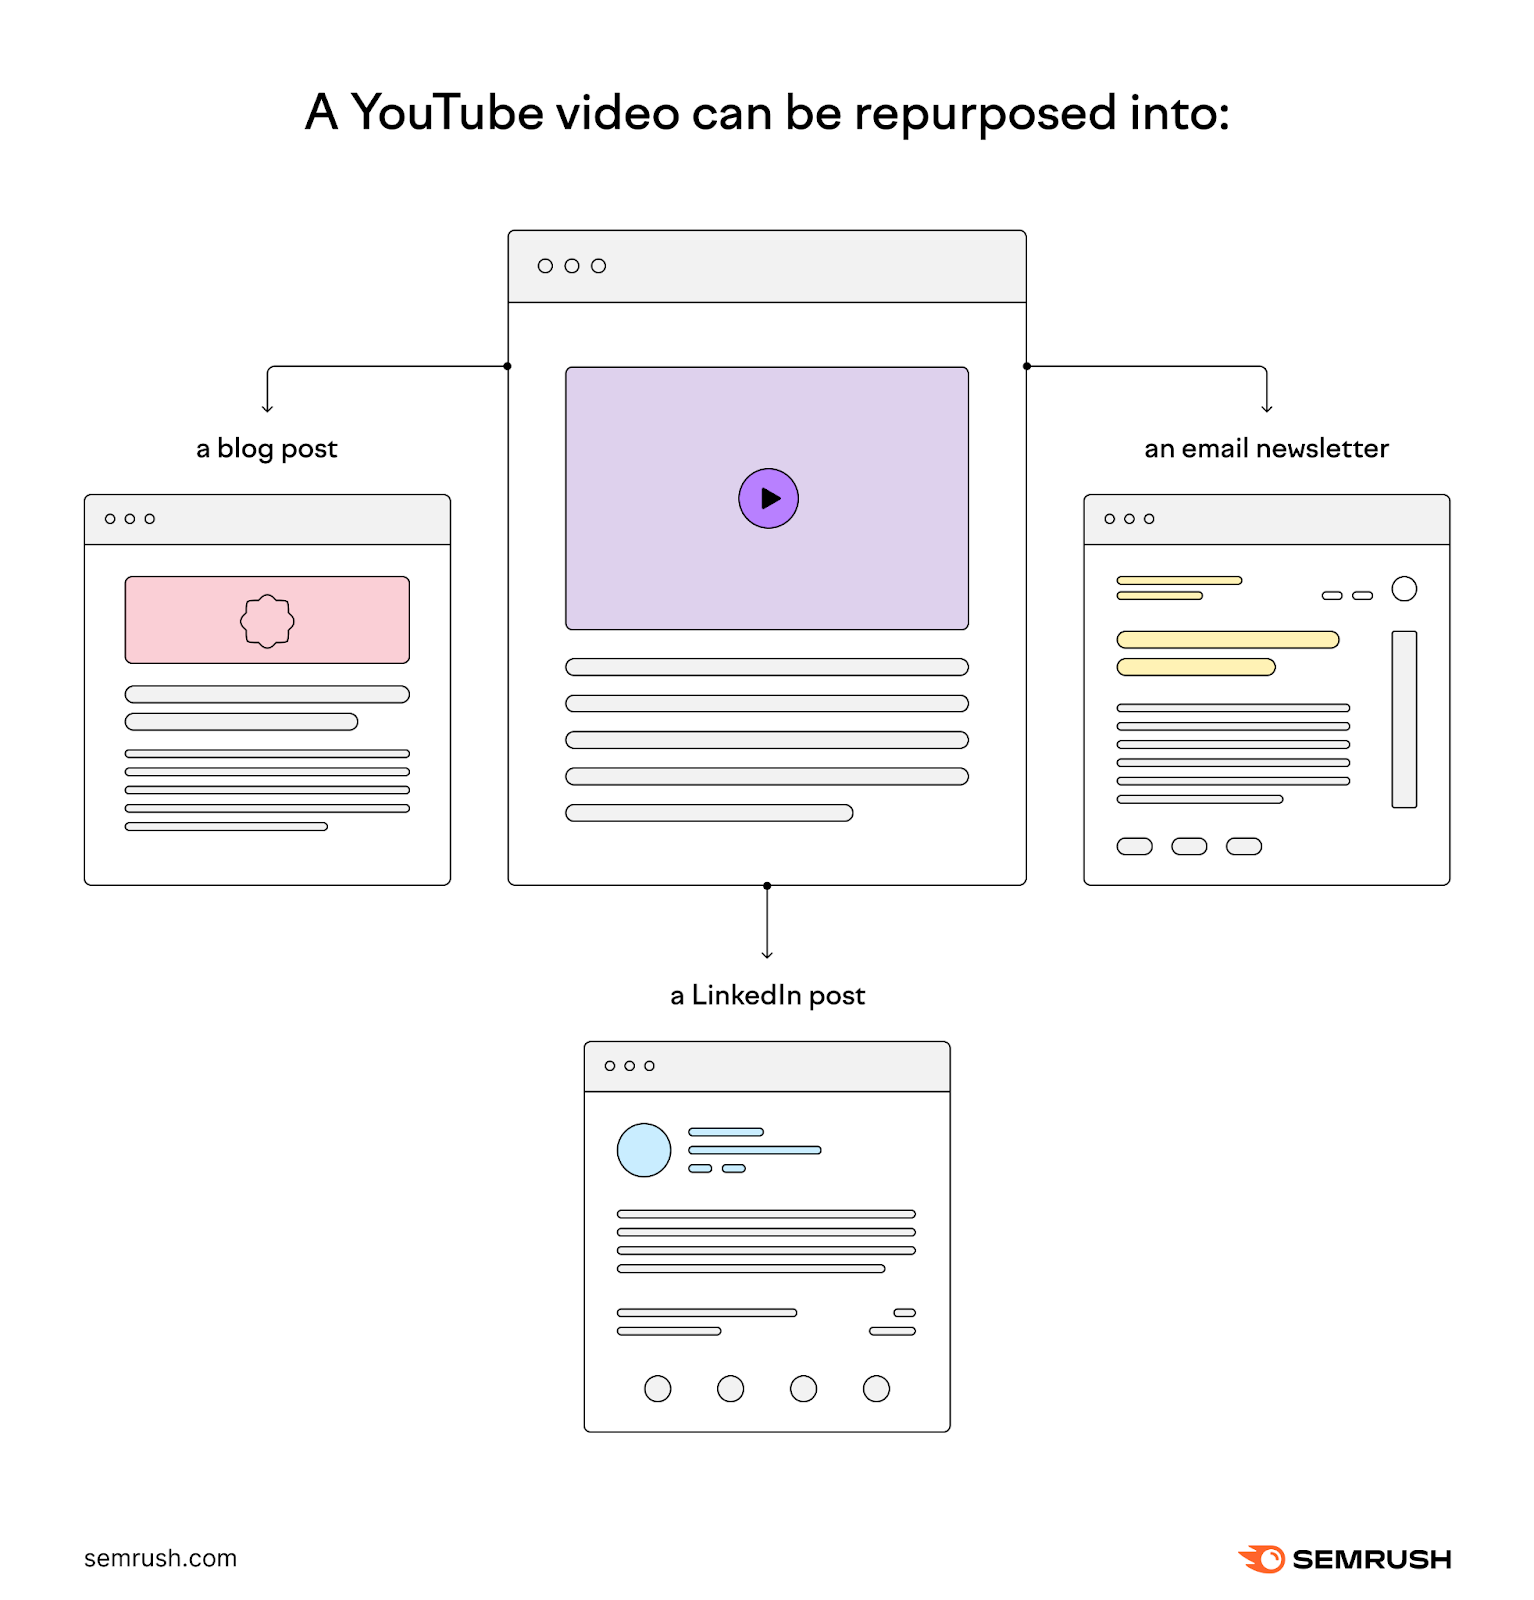 repurposing video into a blog post, an email newsletter, and a LinkedIn post